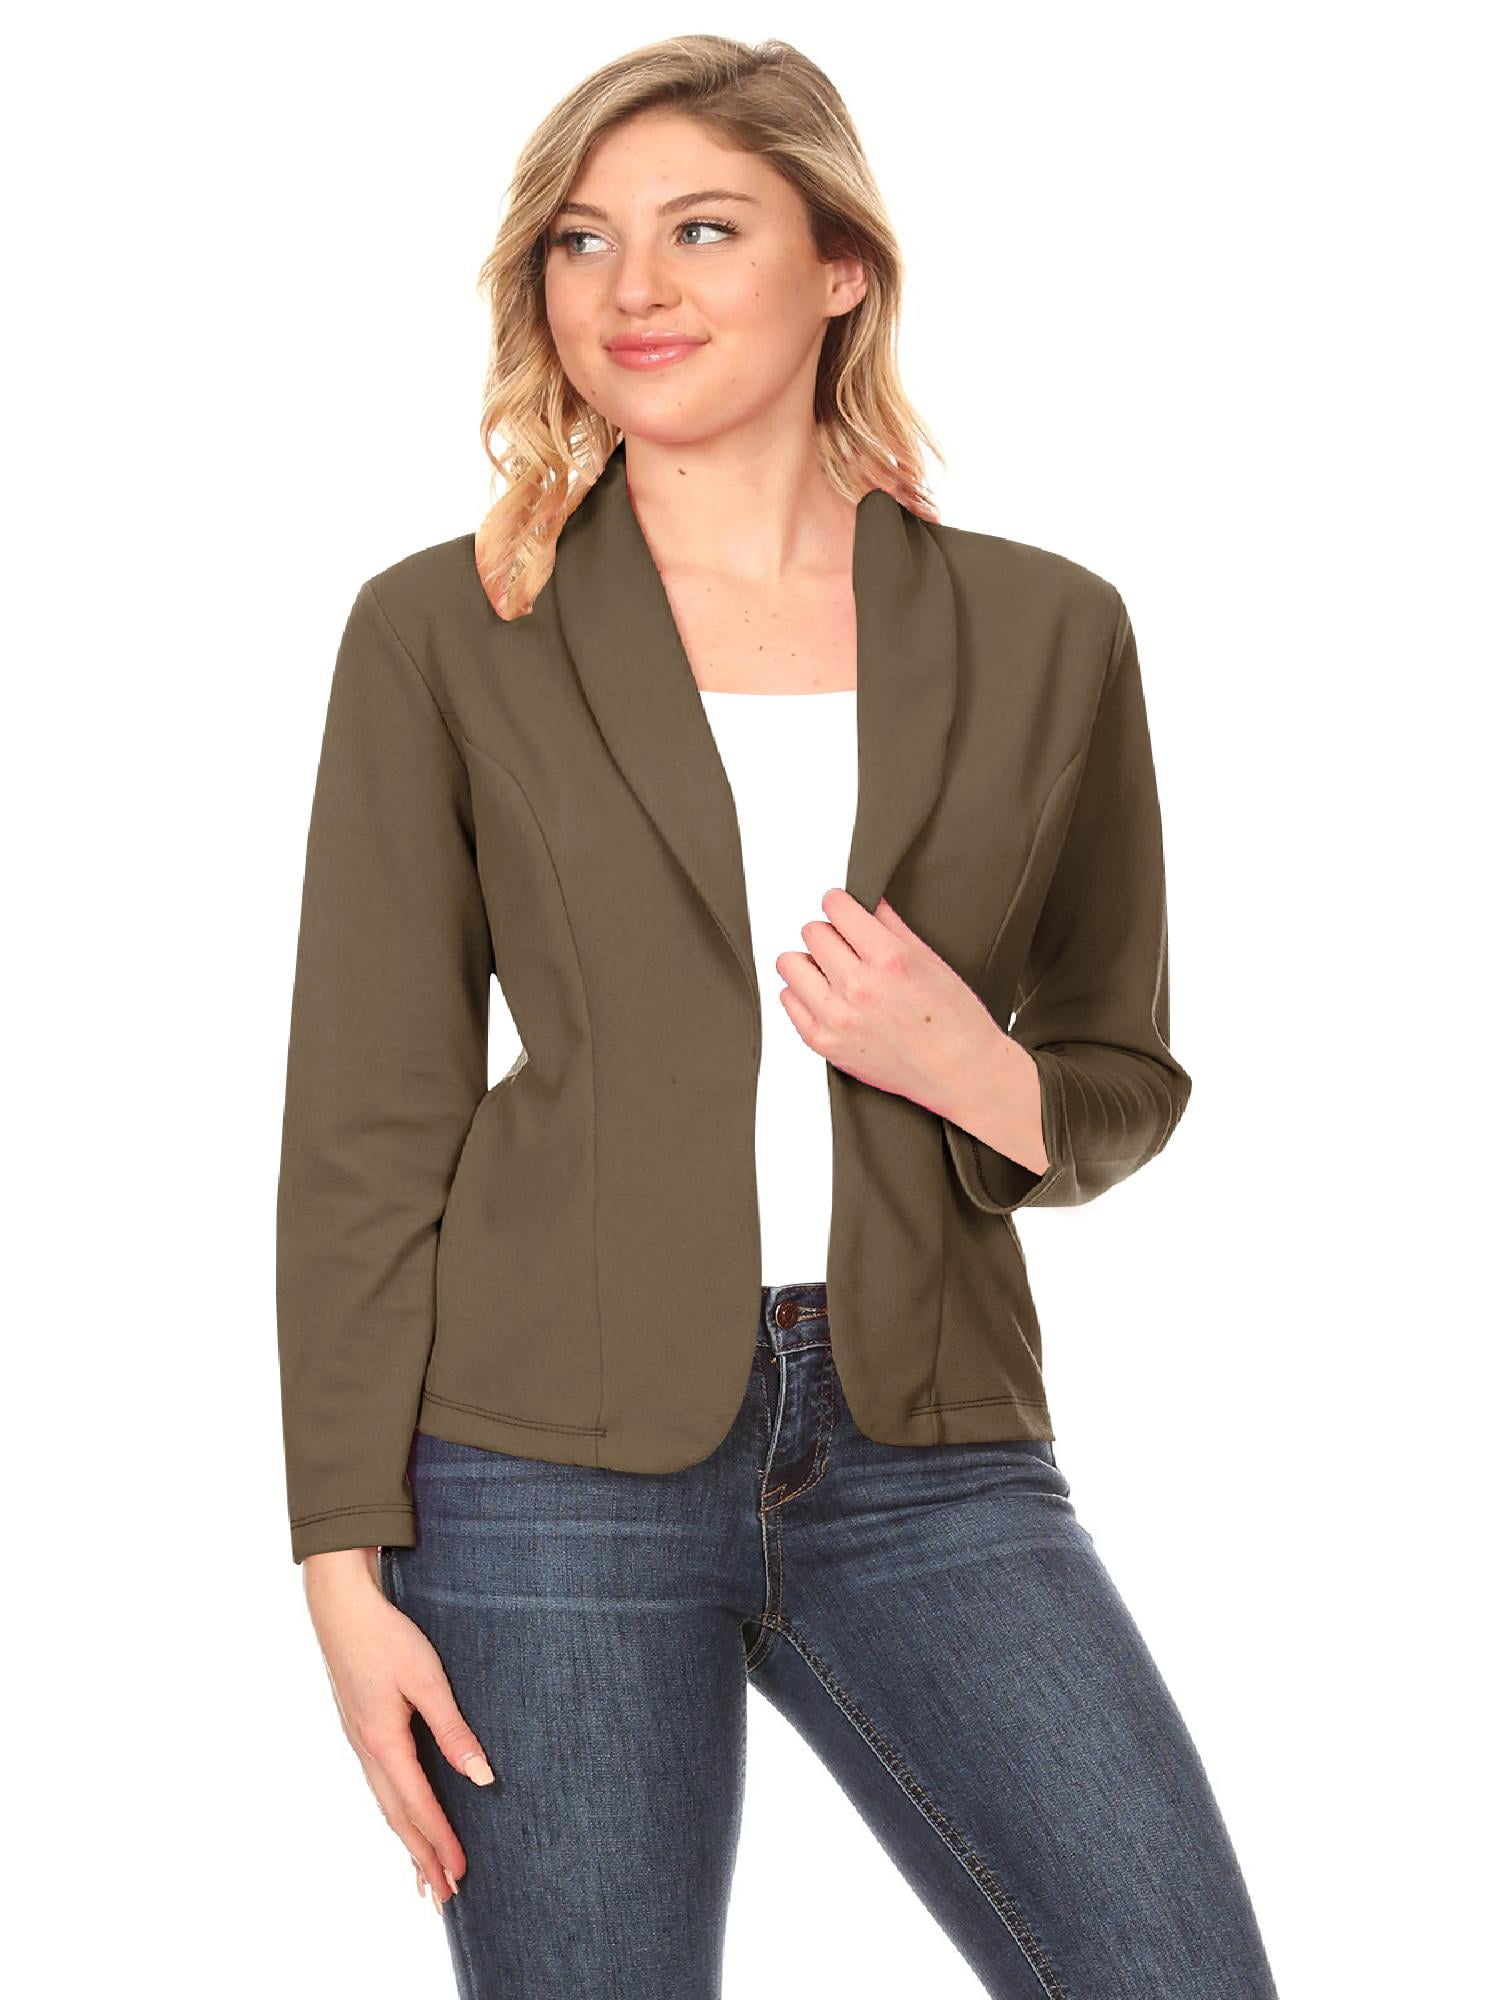 Moa Collection - Women&amp;#39;s Solid Casual Office Work Long Sleeve Open Front Blazer Jacket Made in USA S-3XL